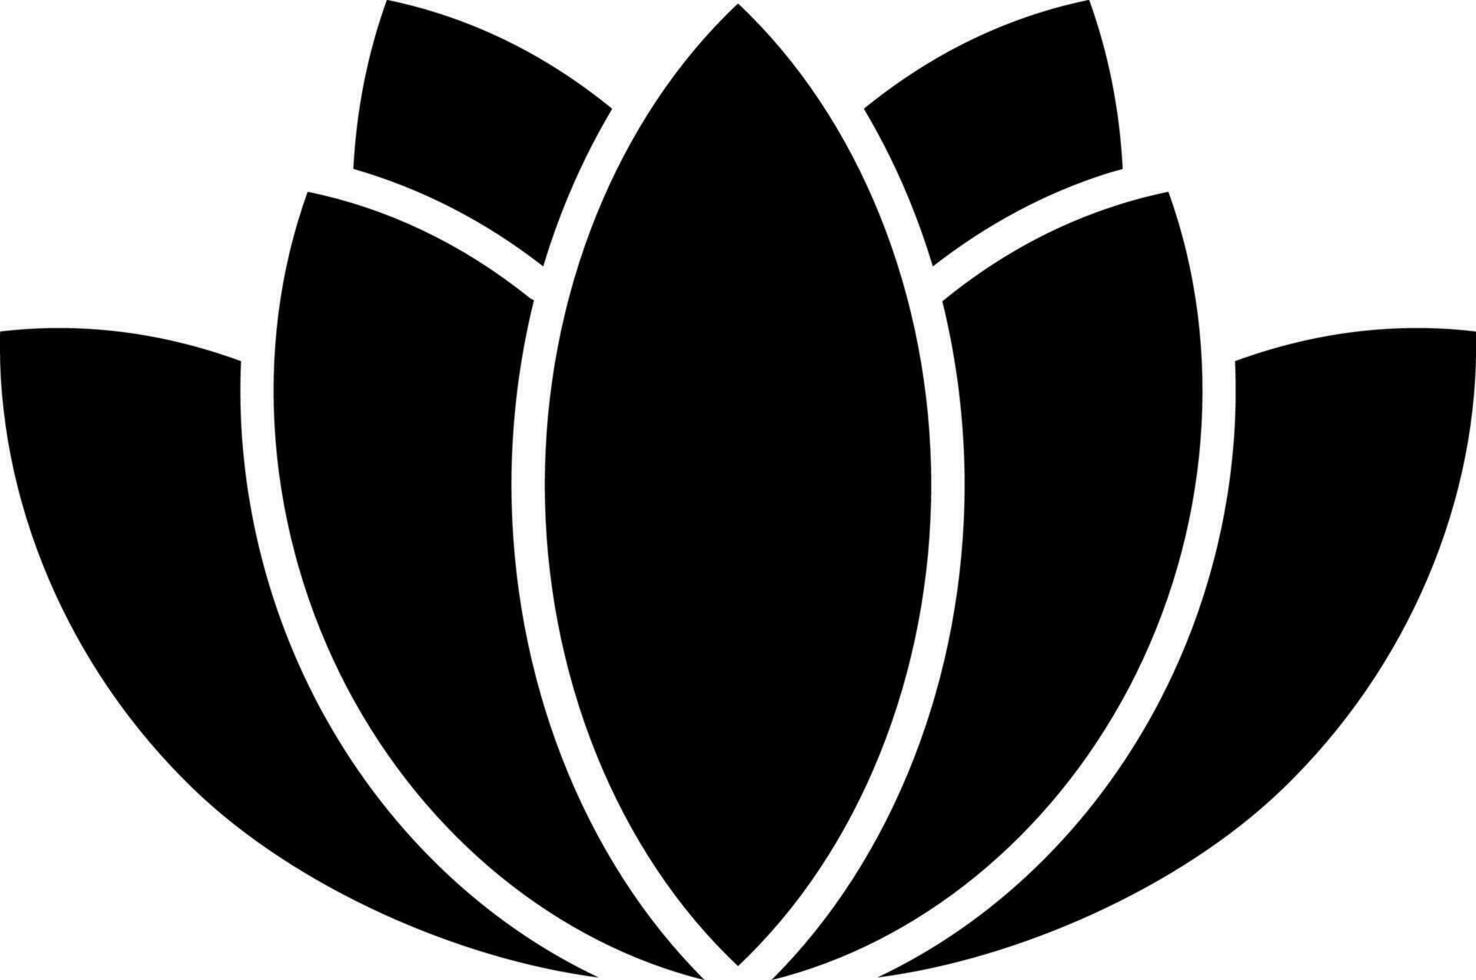 Black and White lotus flower icon in flat style. vector